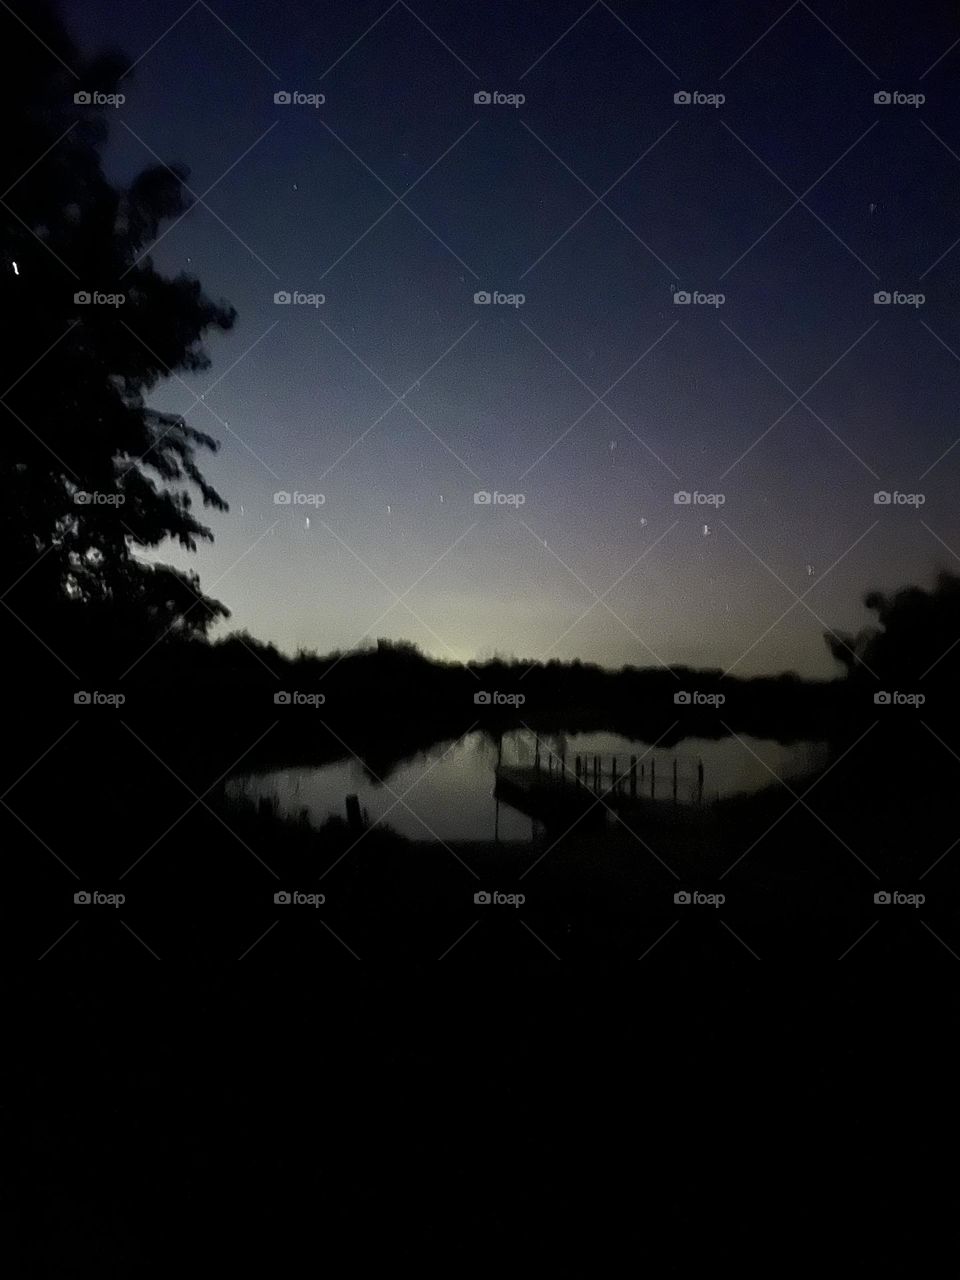 Night view of stars and boat ramp.